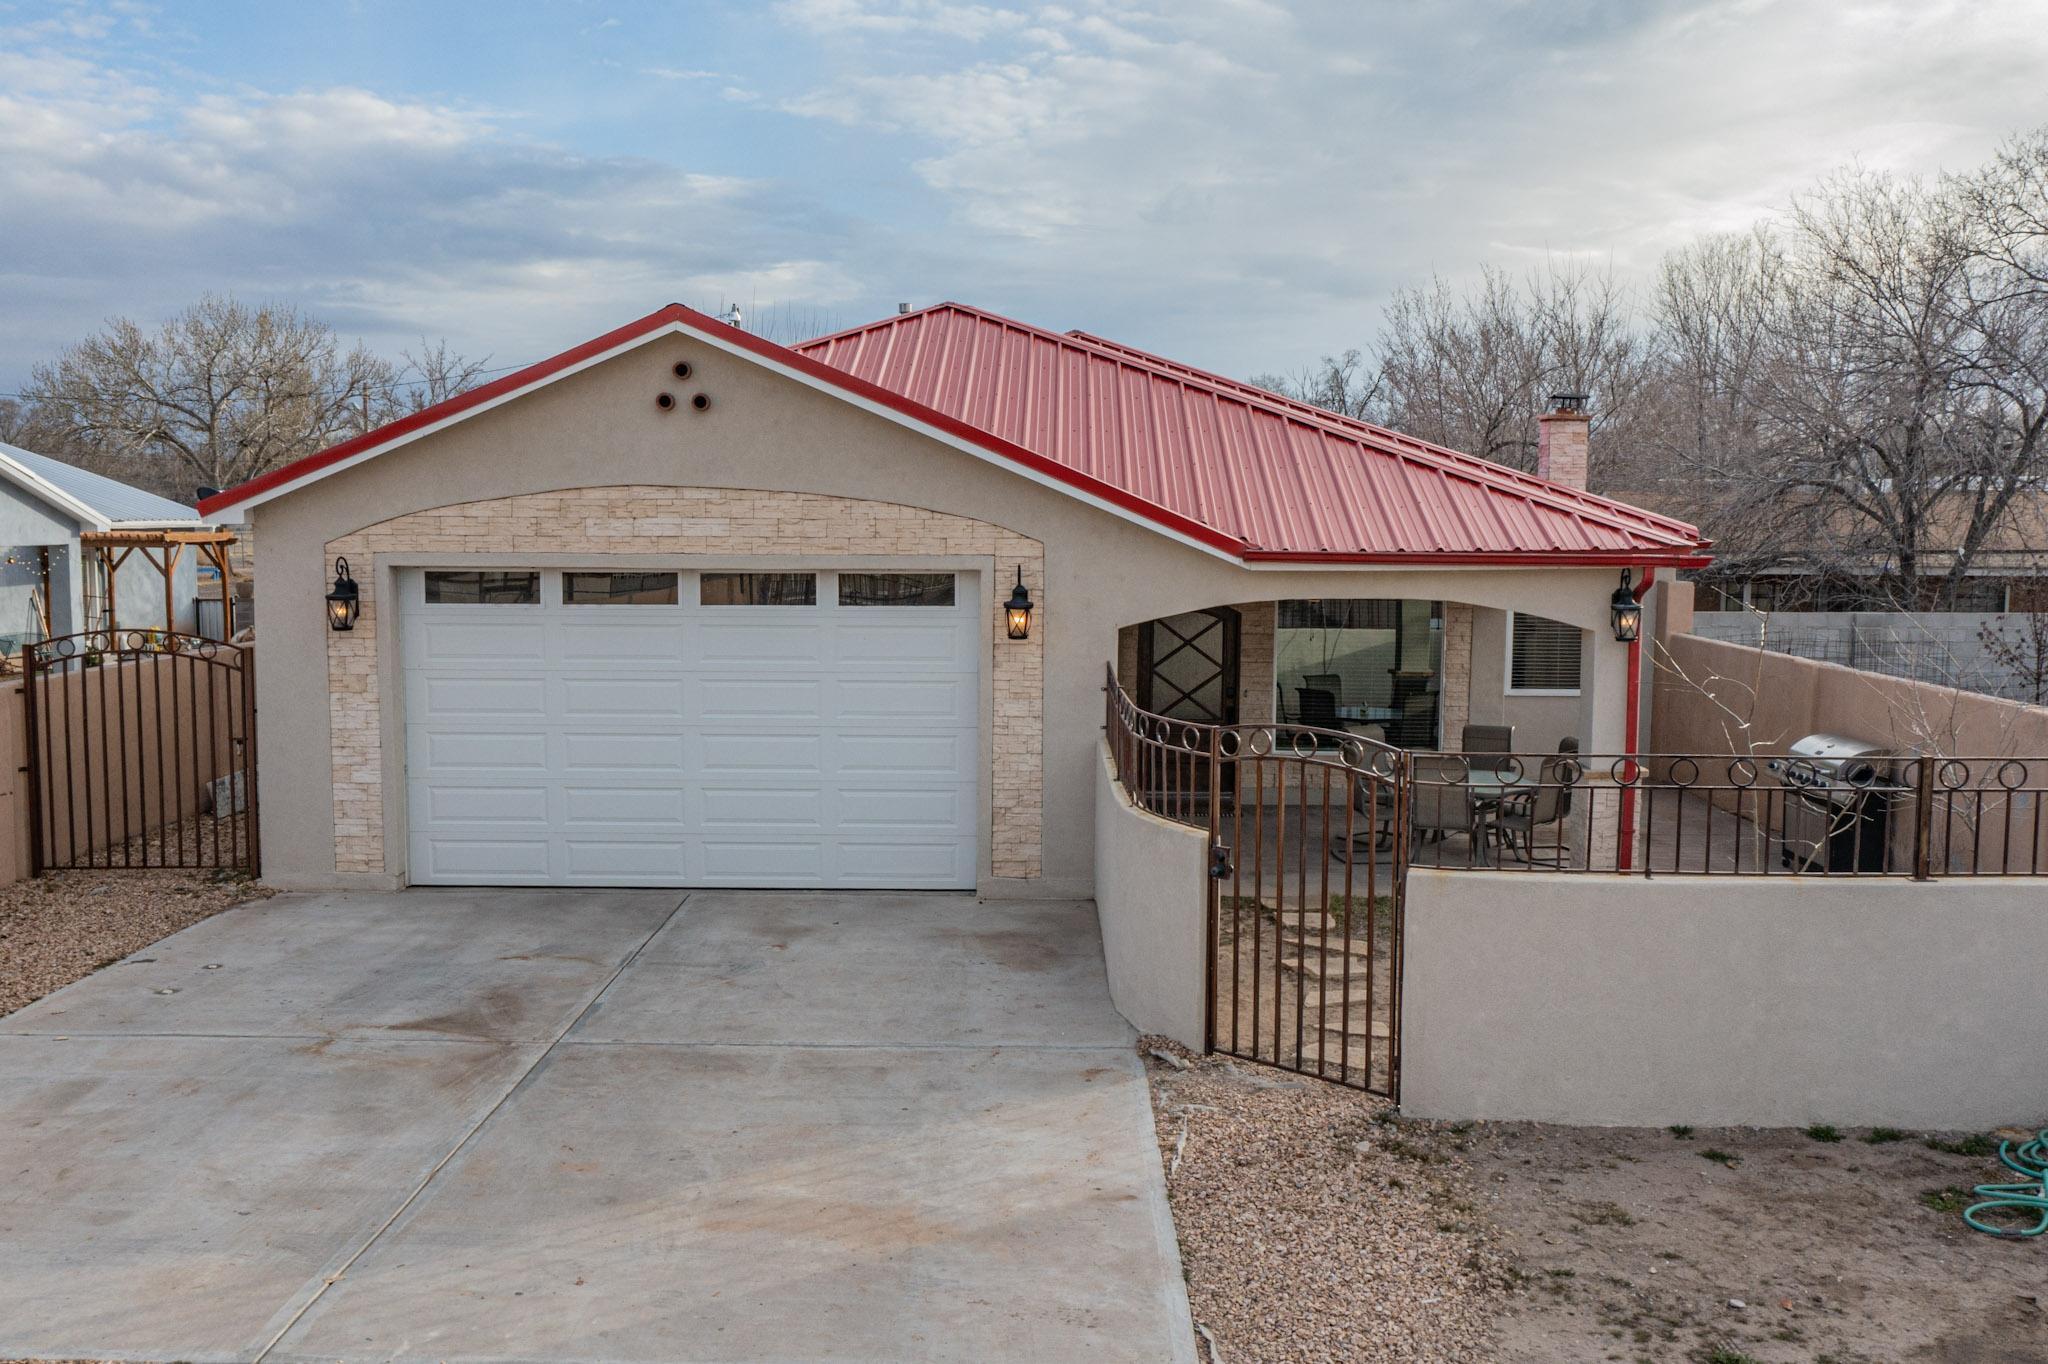 Bring your buyers to this Gem located by Rio Grande High School. Sitting on 1/3 of an acre, there is ample room for your extra vehicles and trailers.. The property is completely fenced with an automatic gate. Built in 2019, the home reflects the pride of ownership. Enter through the custom front door and take in the open concept floor plan. stunning tile floors and stack stone fireplace. The kitchen with its stainless steel appliances, beautiful cabinetry  and granite counter tops will please the cook in the family. There is a spacious primary bedroom and beautiful primary bathroom for the owners to retreat to. The three other bedrooms spacious as well. A built in wet bar in the gameroom/den is great for entertaining. Out back is ample storage for the new buyers.